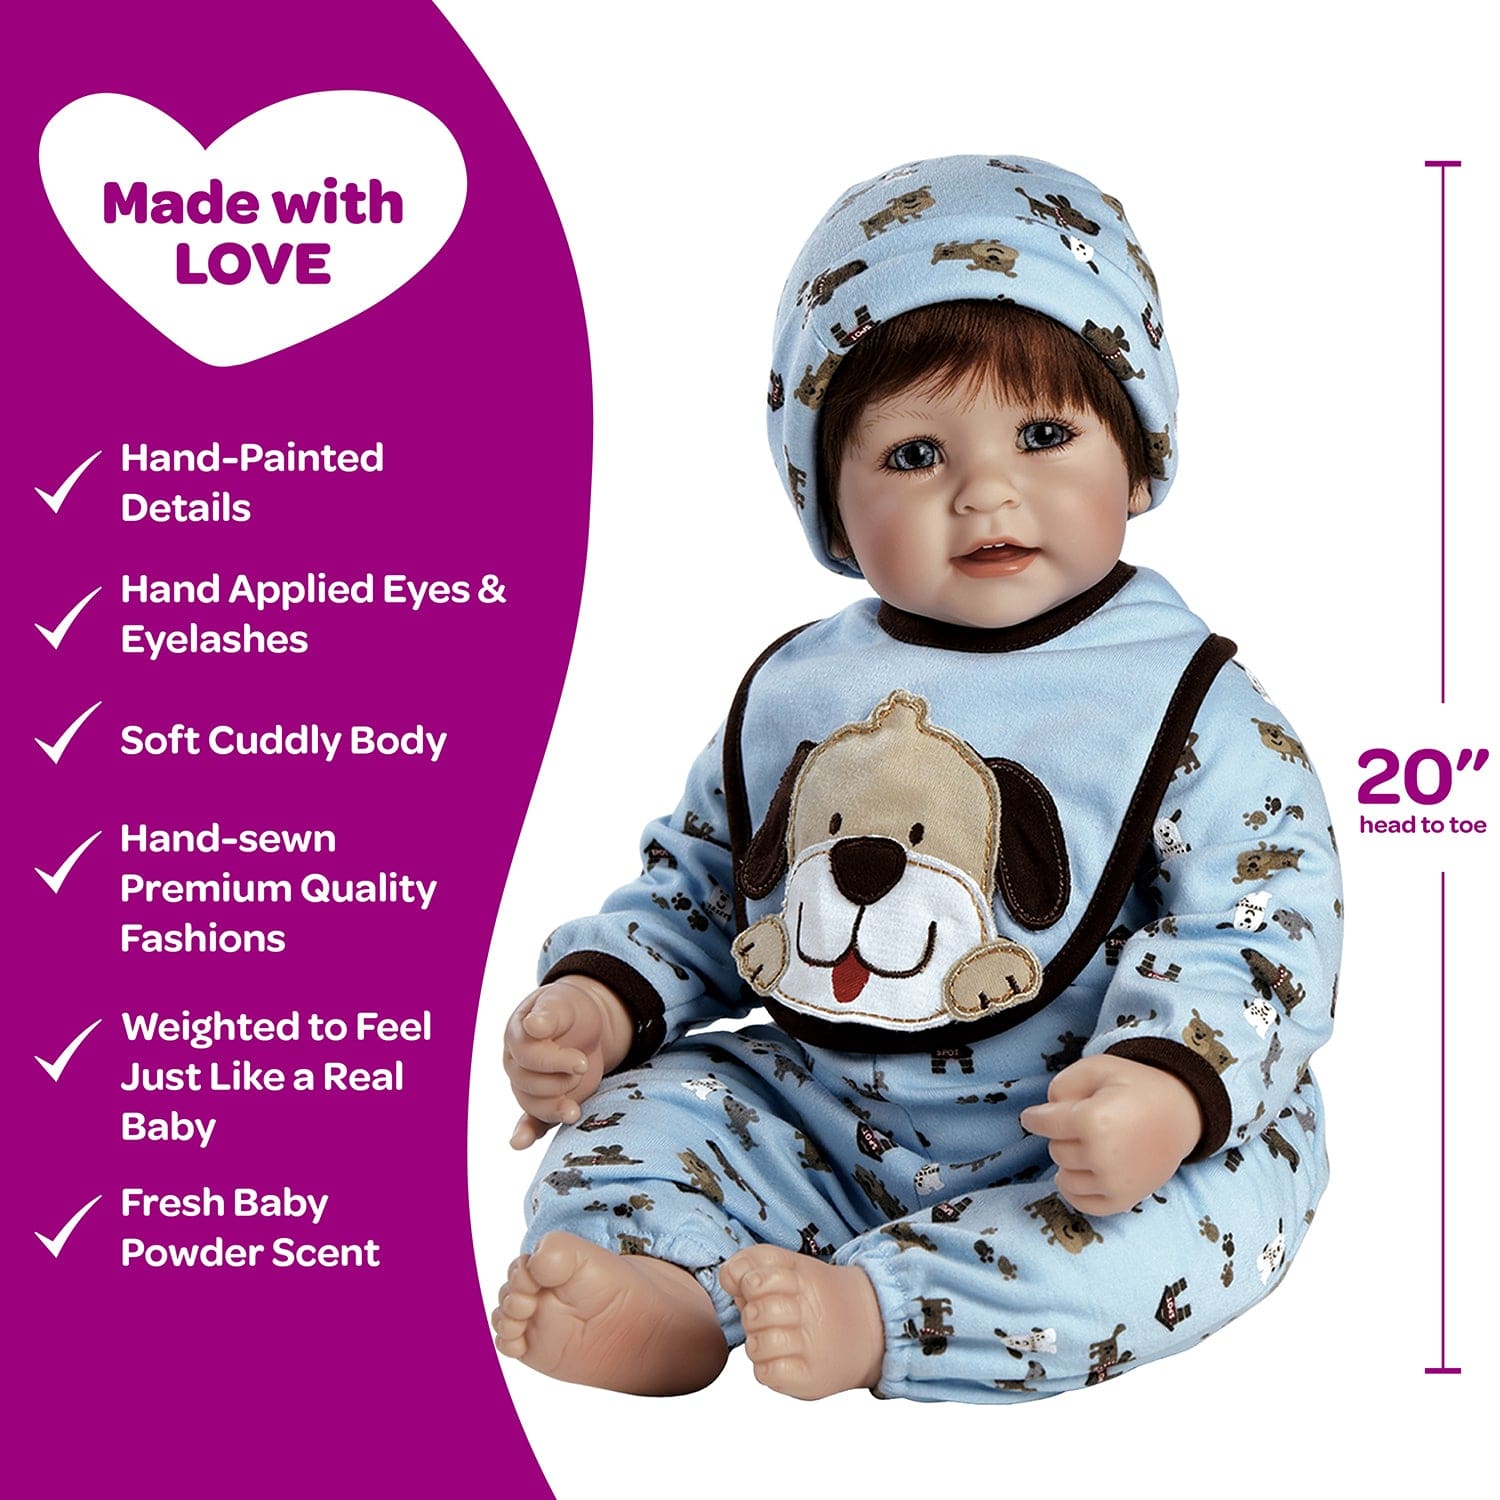 Adora Toddler Doll WOOF! - Baby Doll That Looks Real - 20 inch Boy